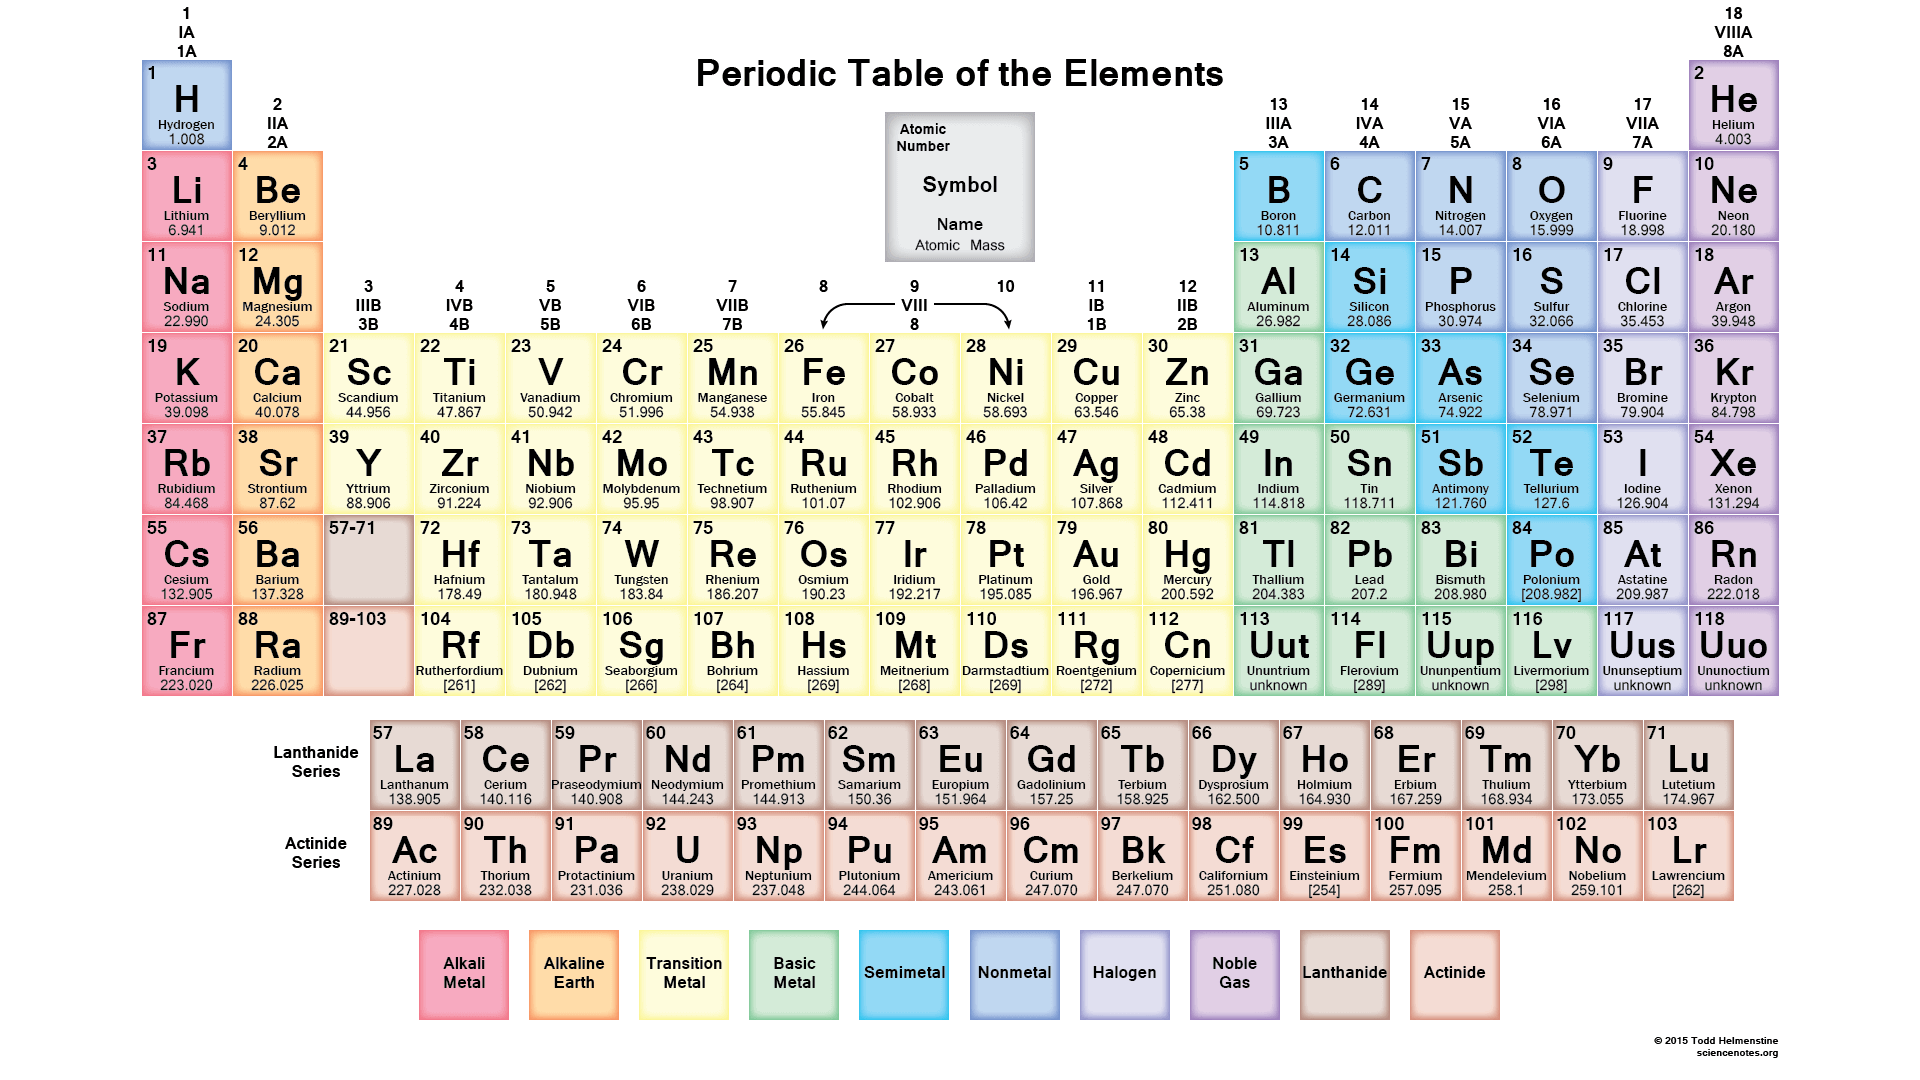 http://sciencenotes.org/printable-periodic-table/